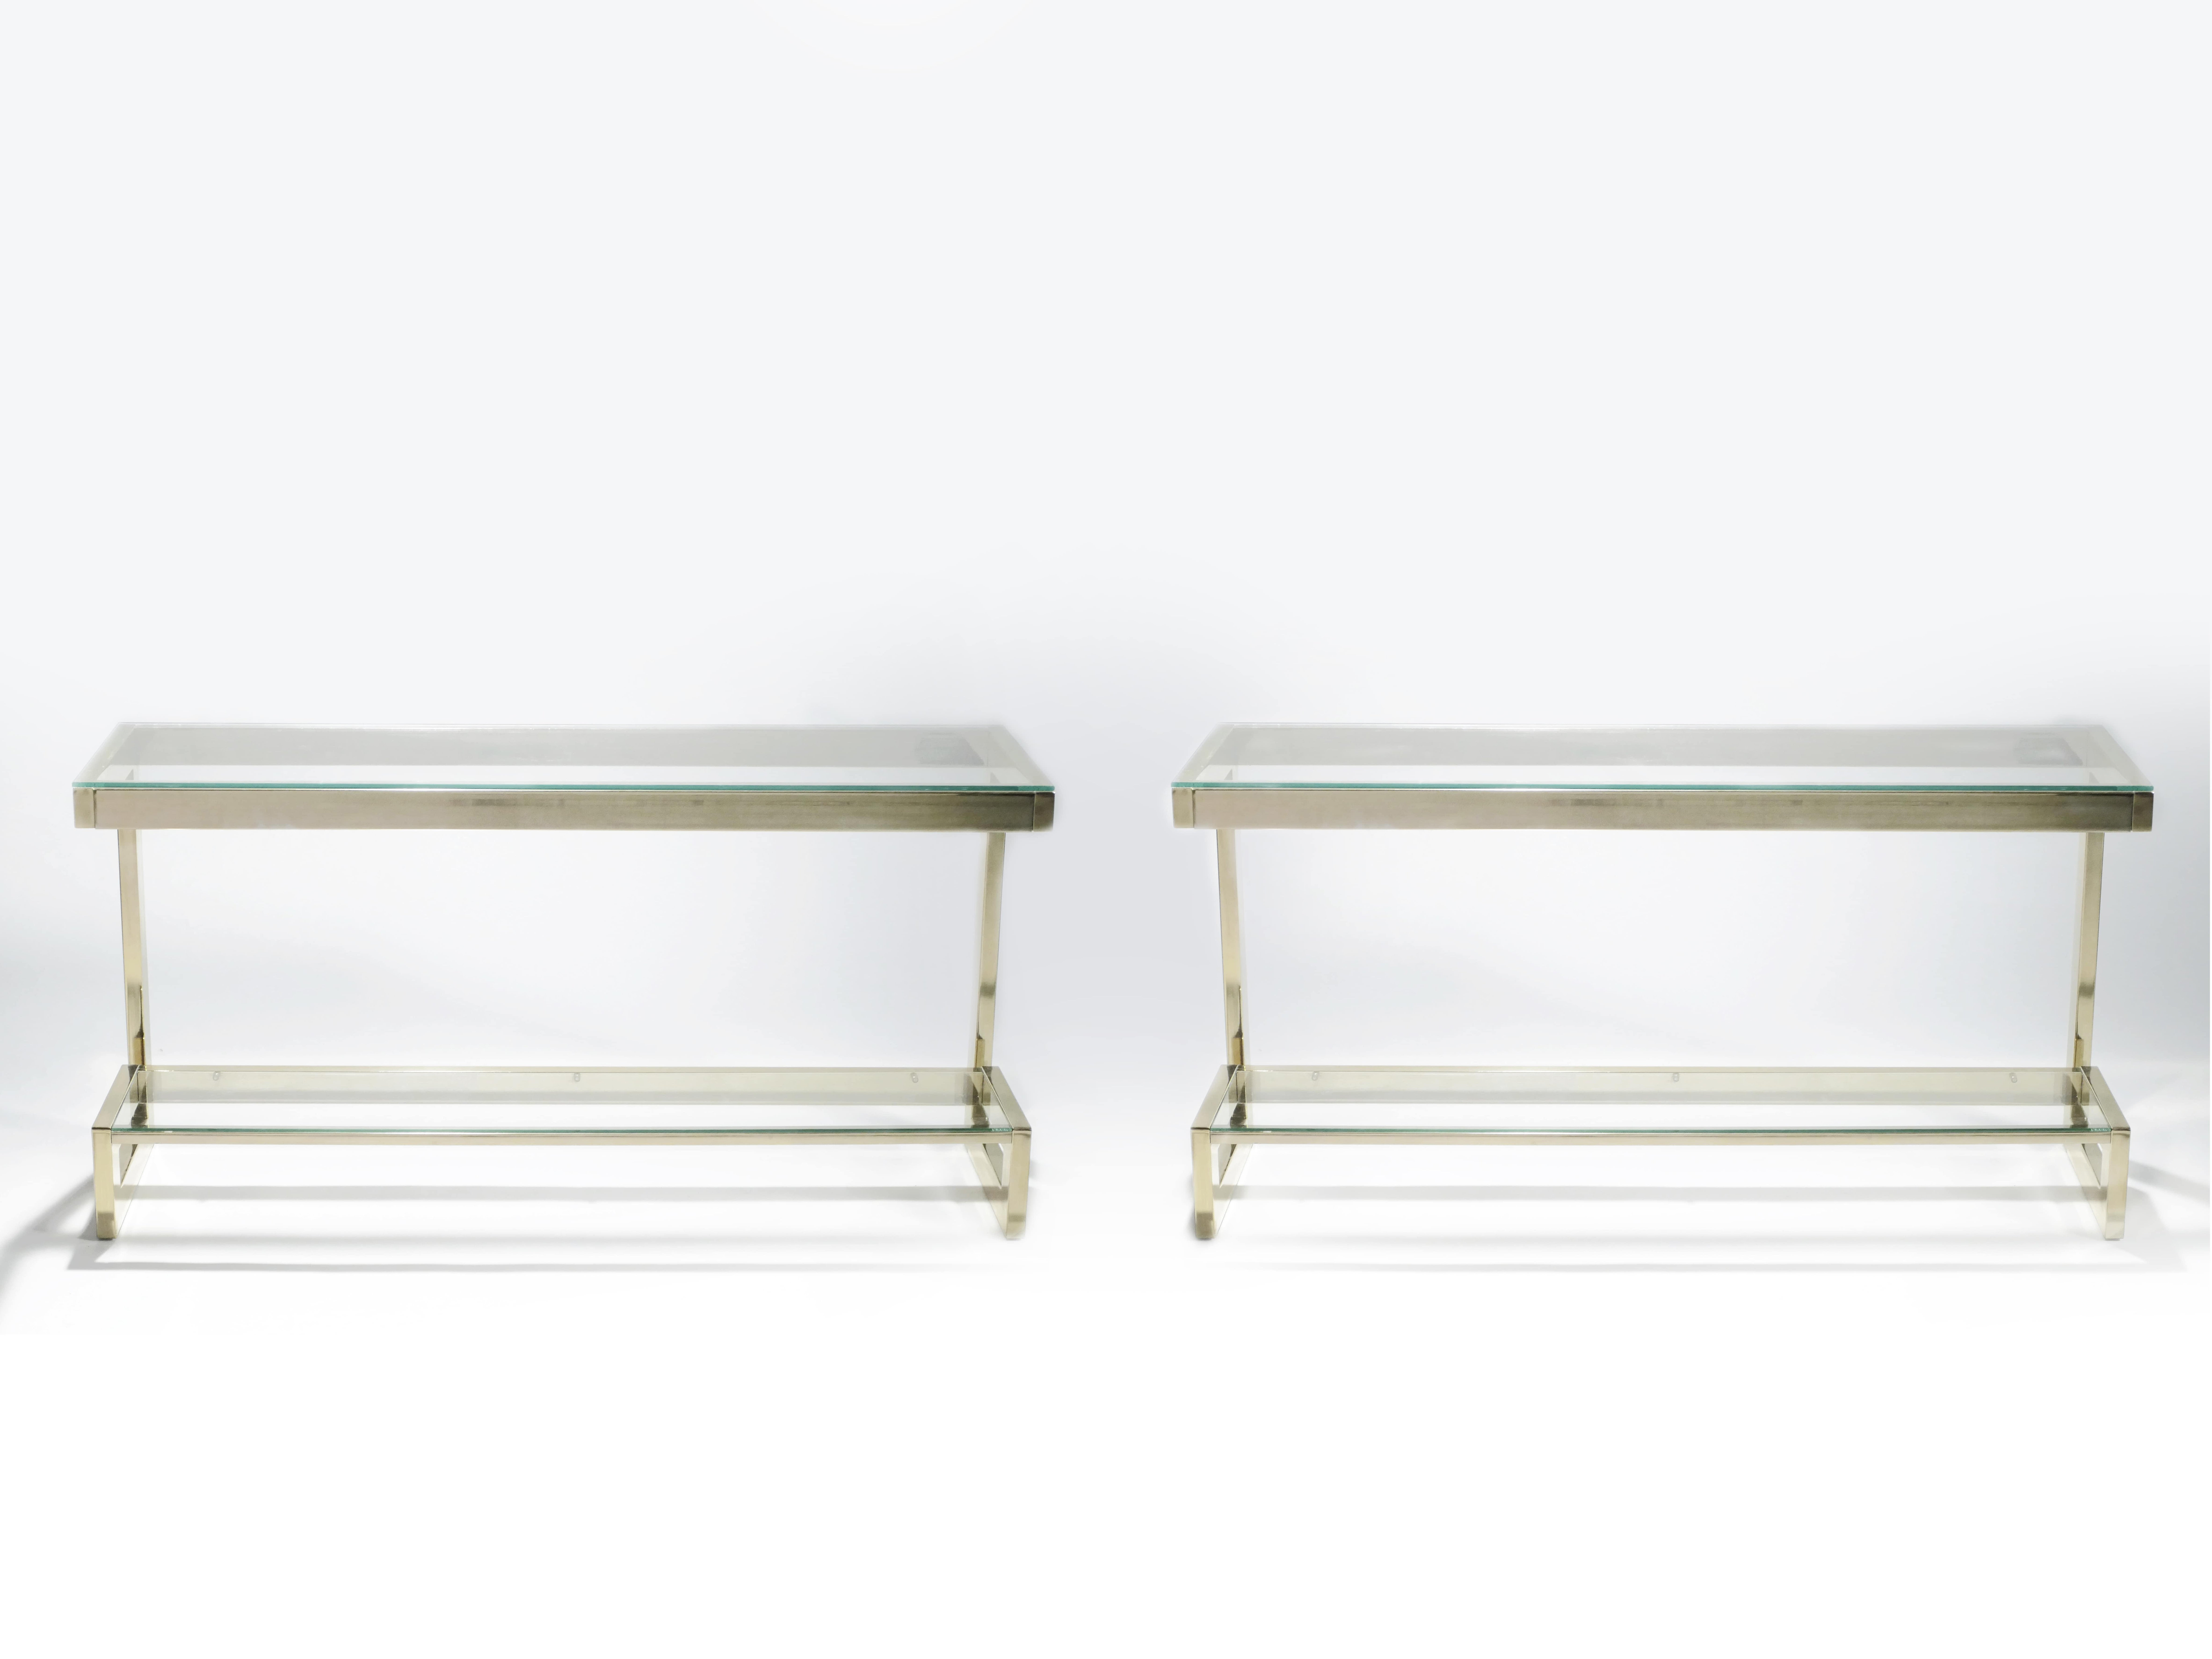 Minimalistic lines become lighter than air in this 1970s pair of console tables. Crafted by Guy Lefevre for Maison Jansen, they features sleek expanses of crystal-clear glass set into a structured gold-tone brass frame. The floating two-tier design